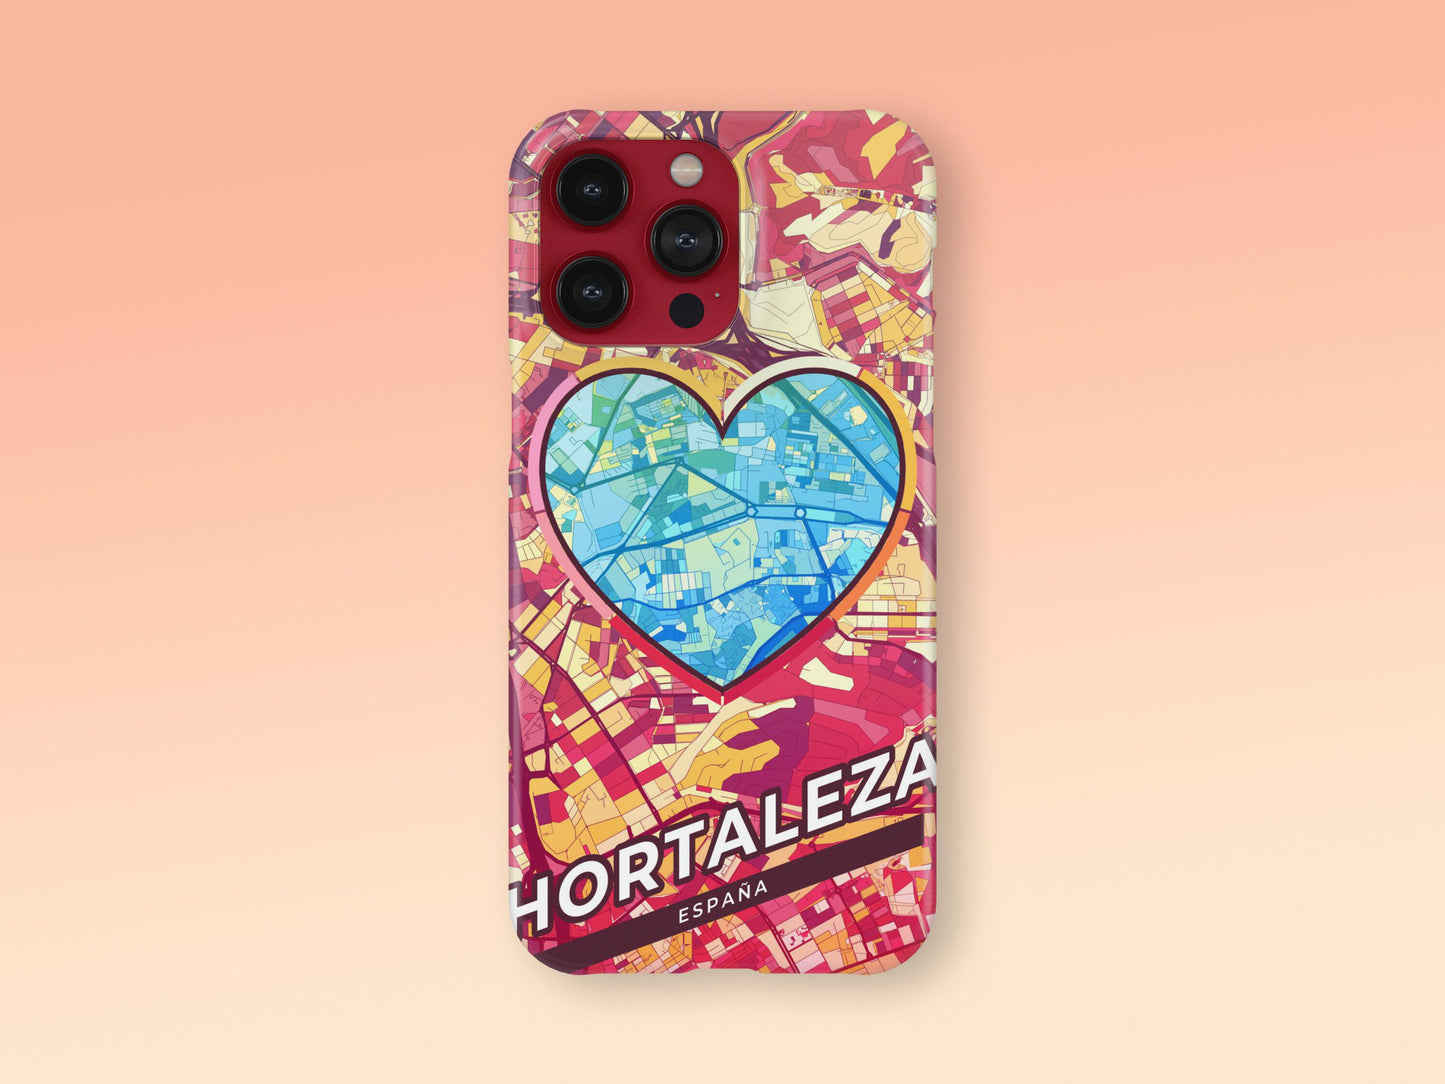 Hortaleza Spain slim phone case with colorful icon. Birthday, wedding or housewarming gift. Couple match cases. 2